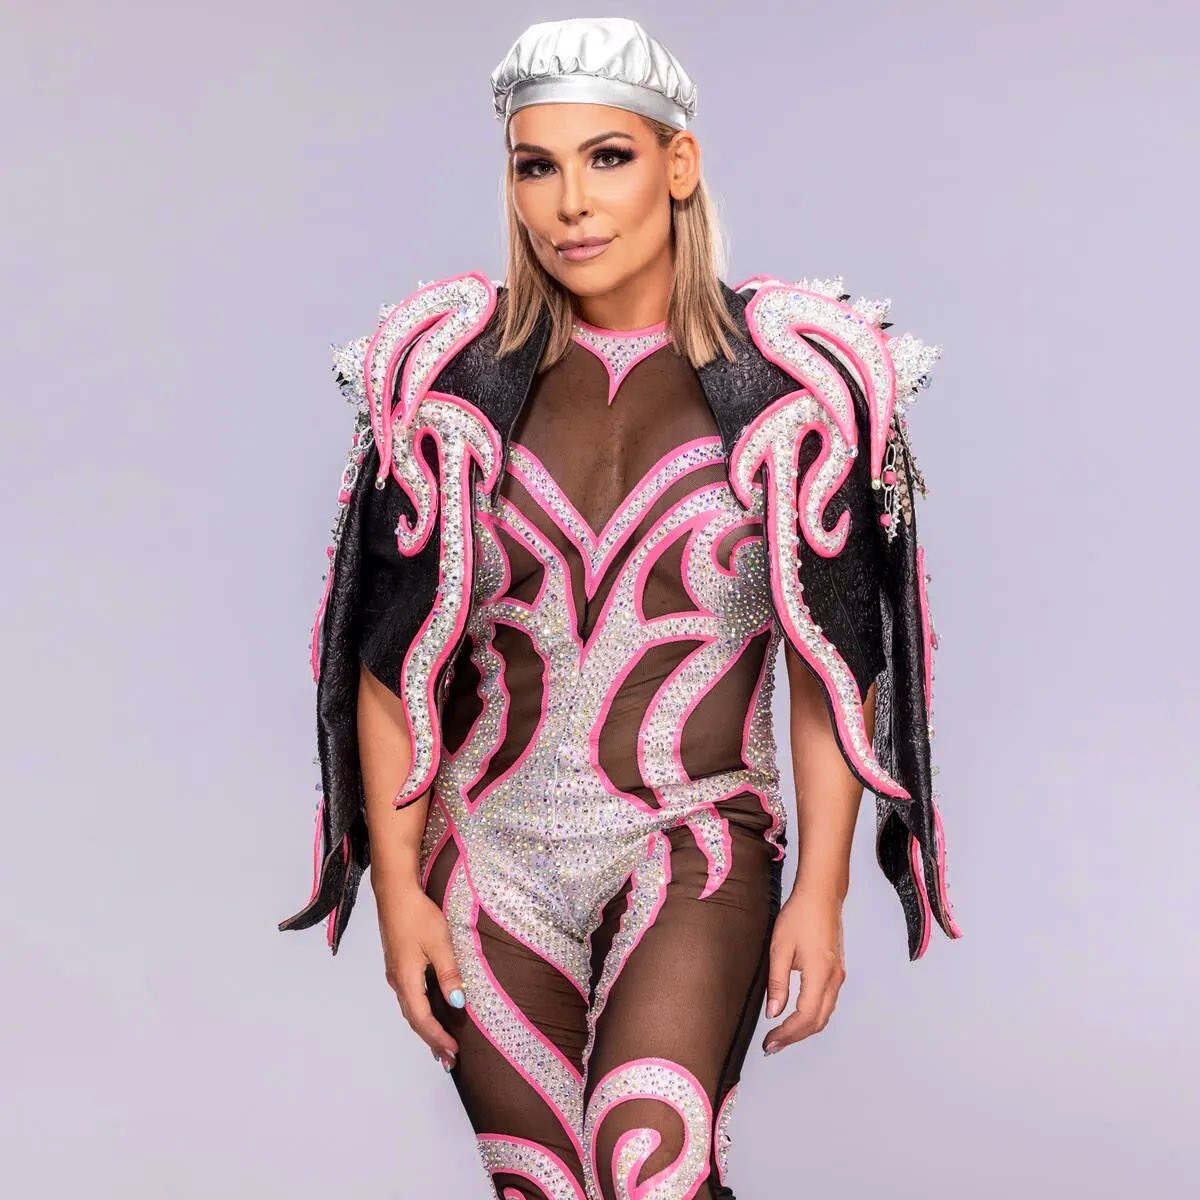 Natalya Is #AllElite 🤪

-Natalya has reportedly still not signed a new deal with WWE. I highly doubt Nat, Becky Lynch or Ricochet will ever leave WWE but in the wrestling world never say never I guess. End of the day, I am sure they will do whats best for them & their families.